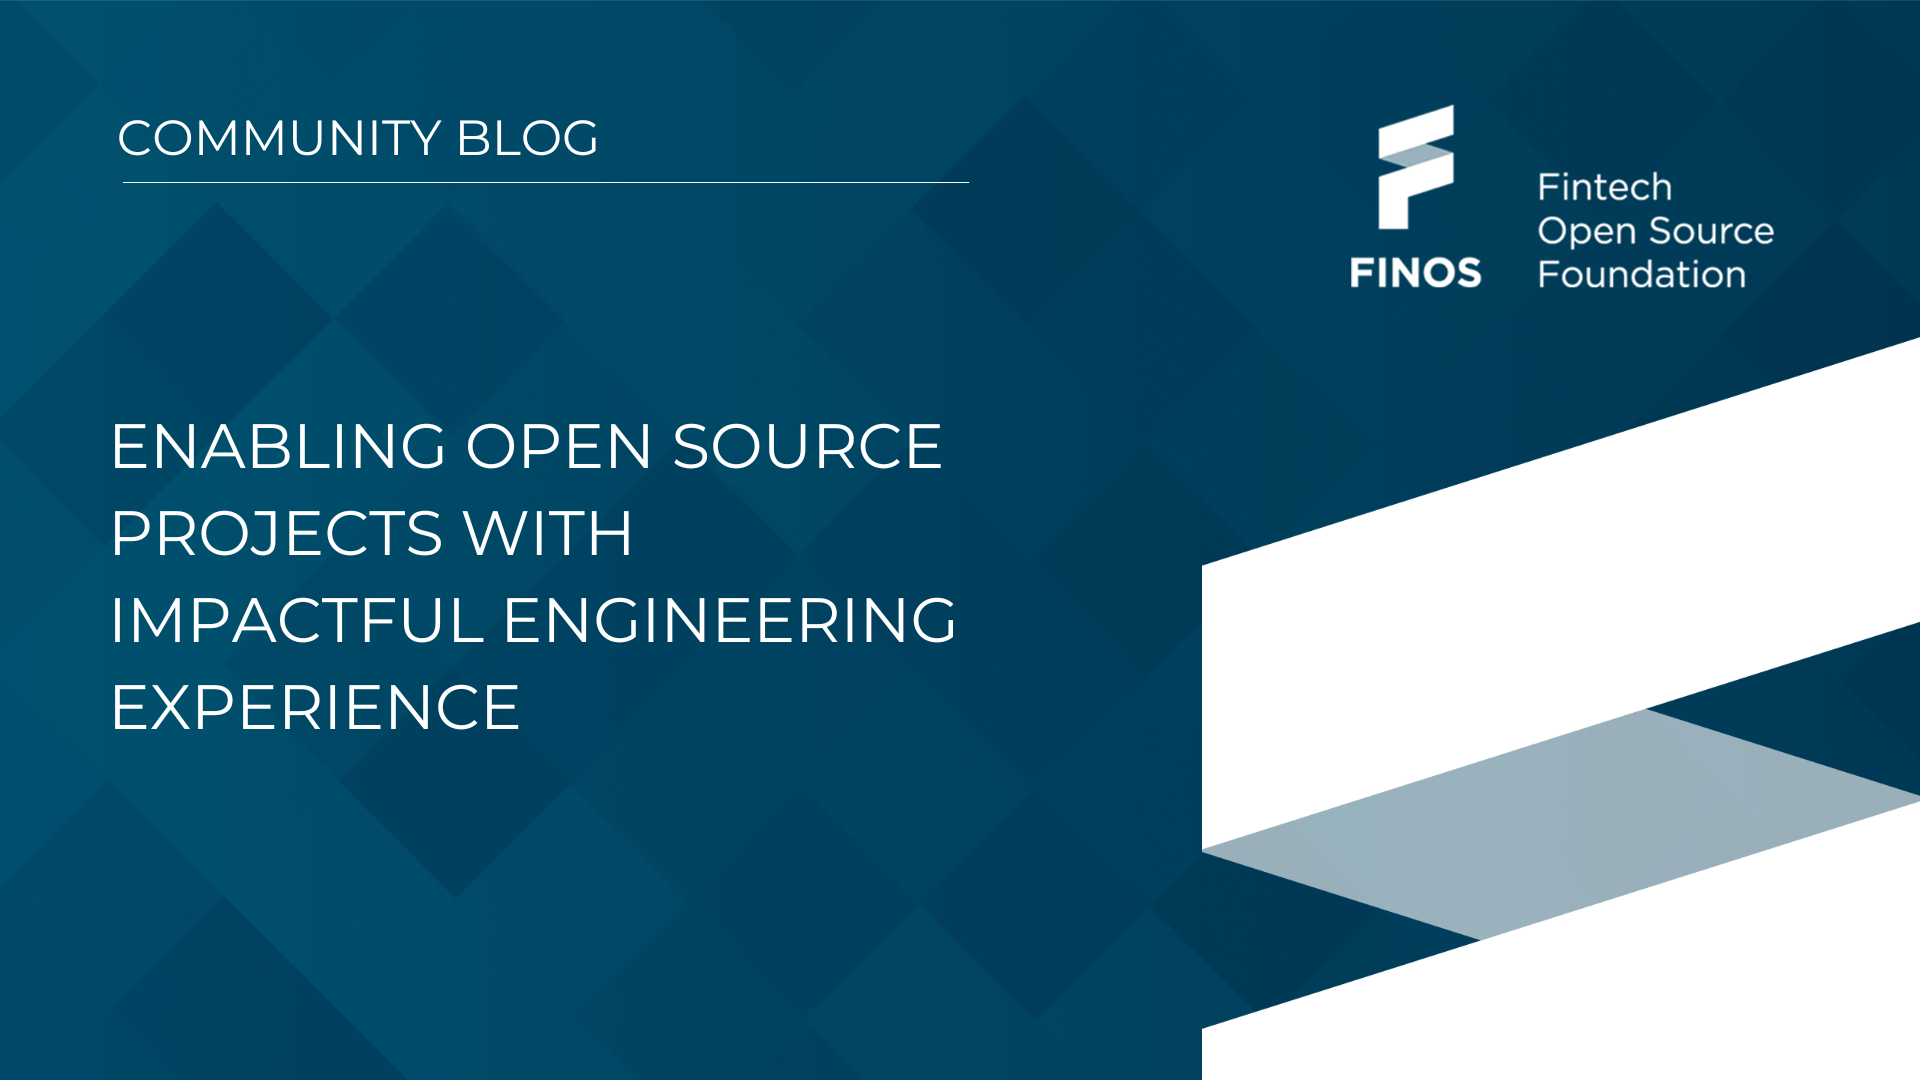 Enabling Open Source Projects with Impactful Engineering Experience - James McLeod 21 June 2022